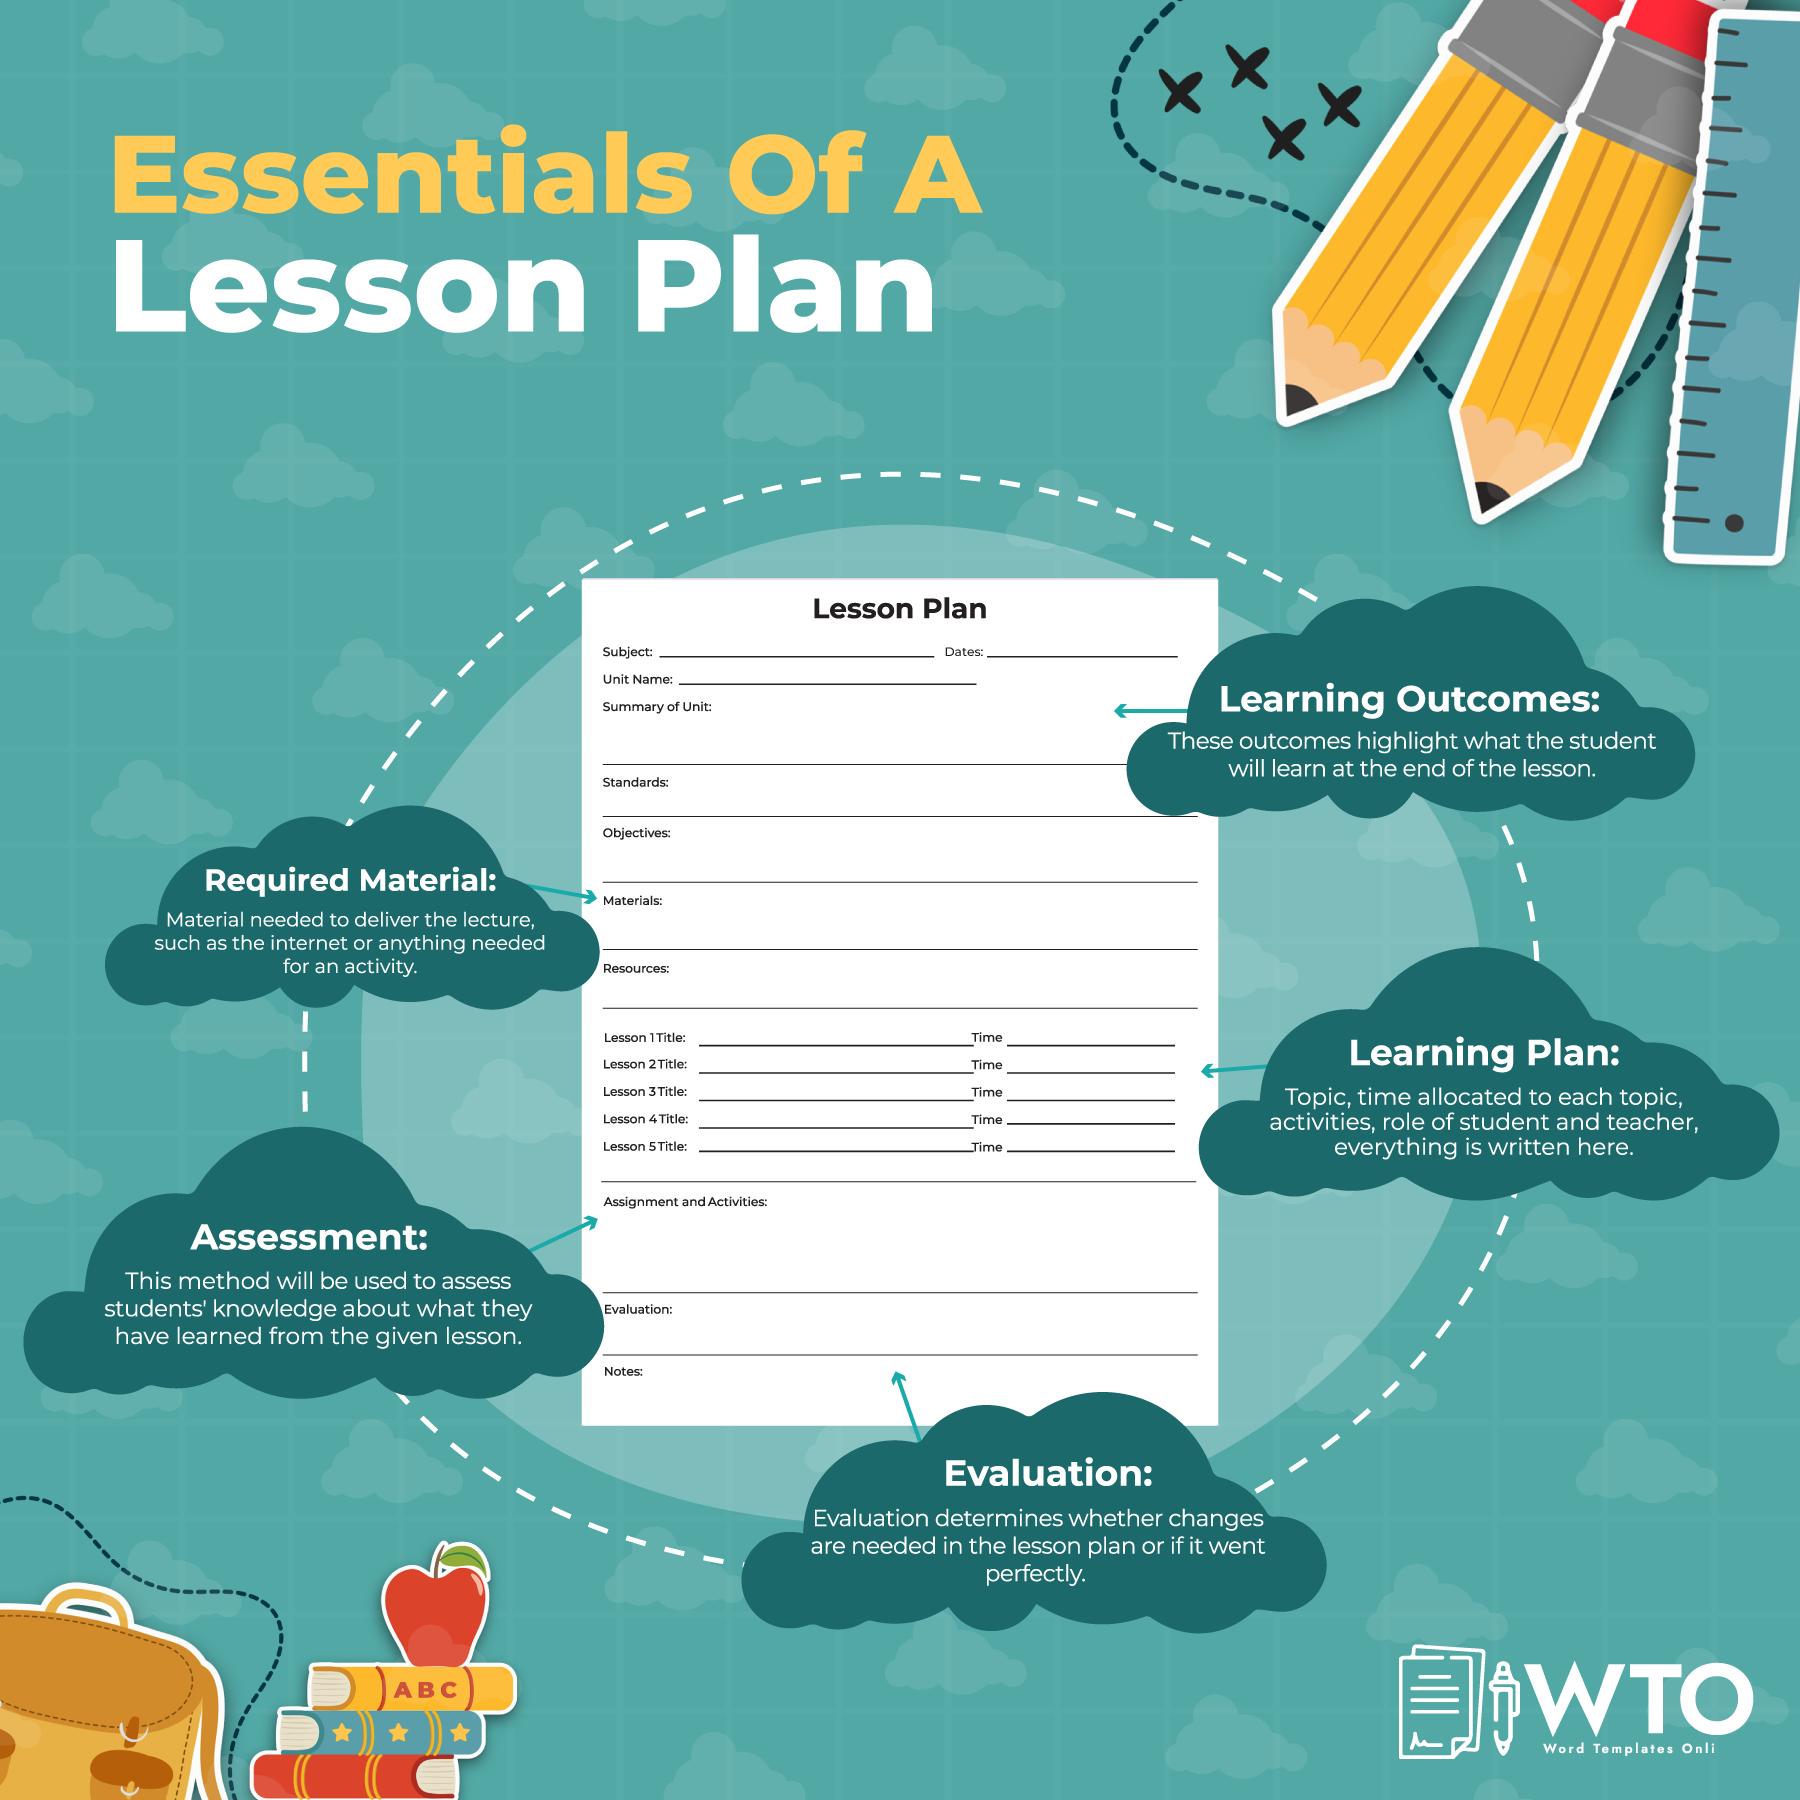 This infographic is about the essentials of a lesson plan.